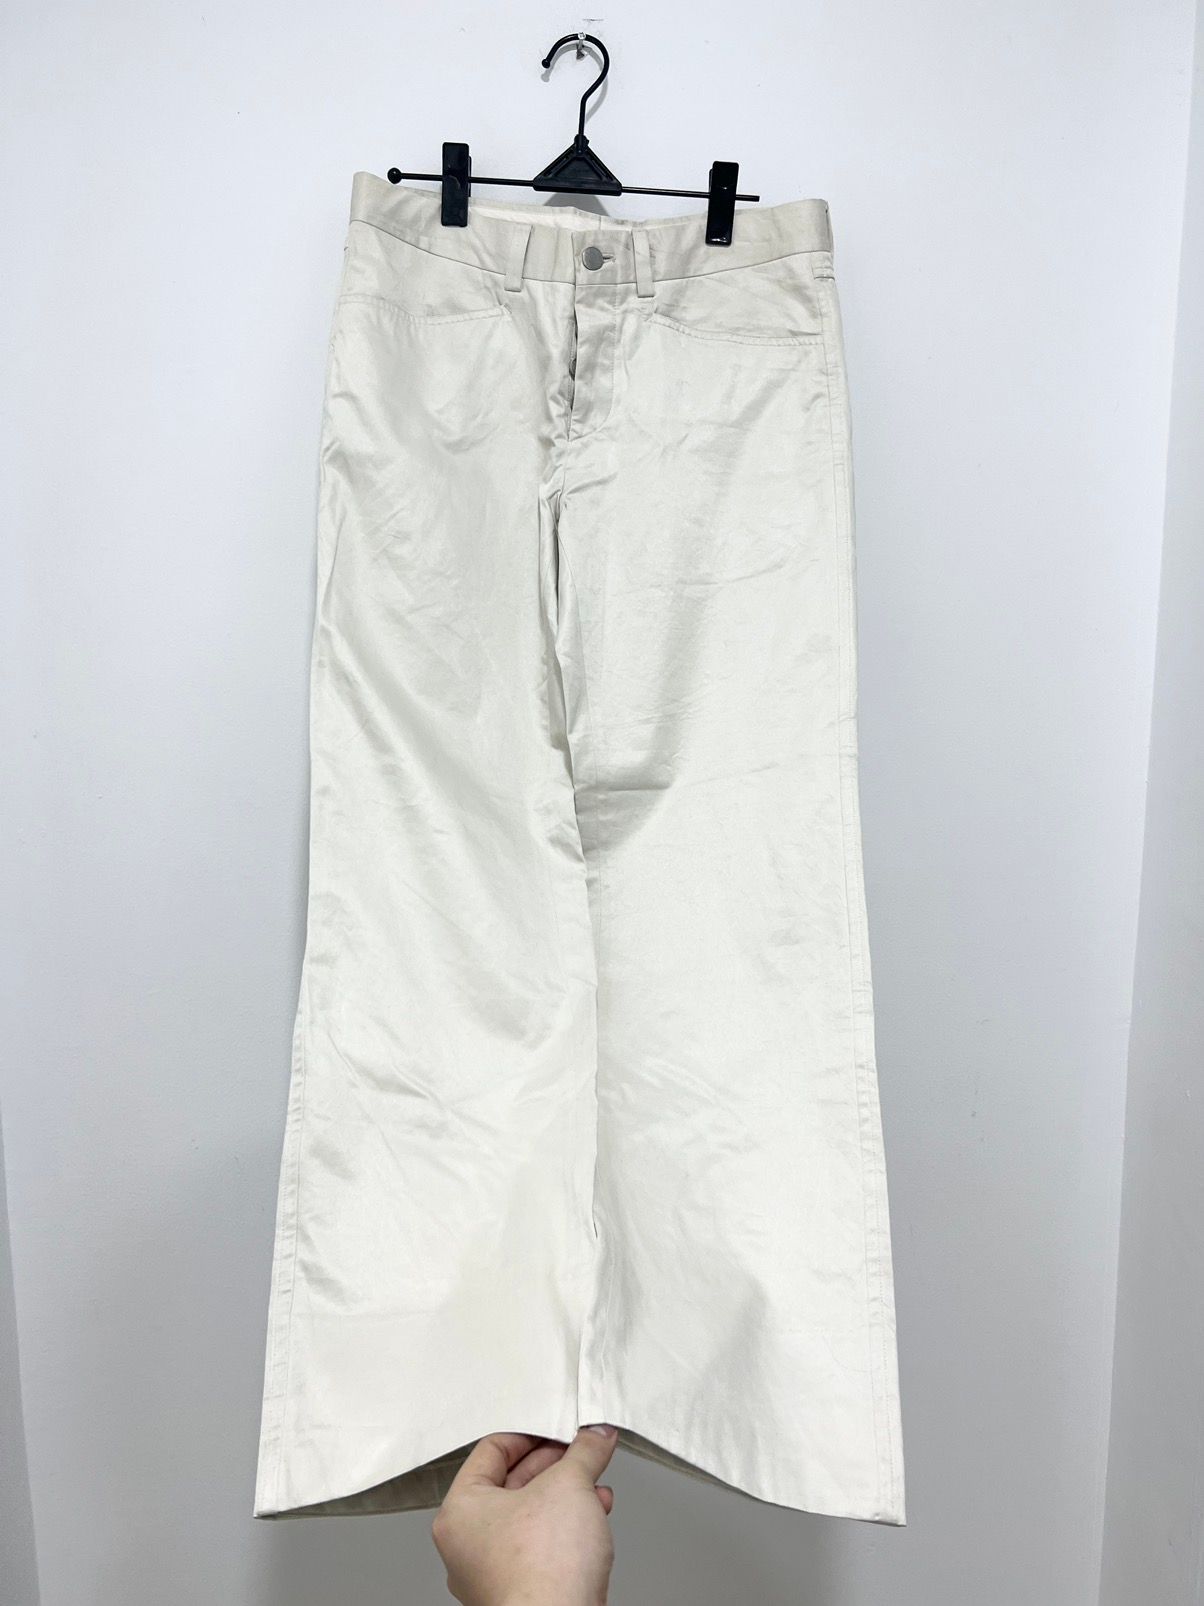 Pre-owned Hermes Silver Wax Coated Pants Bootcut